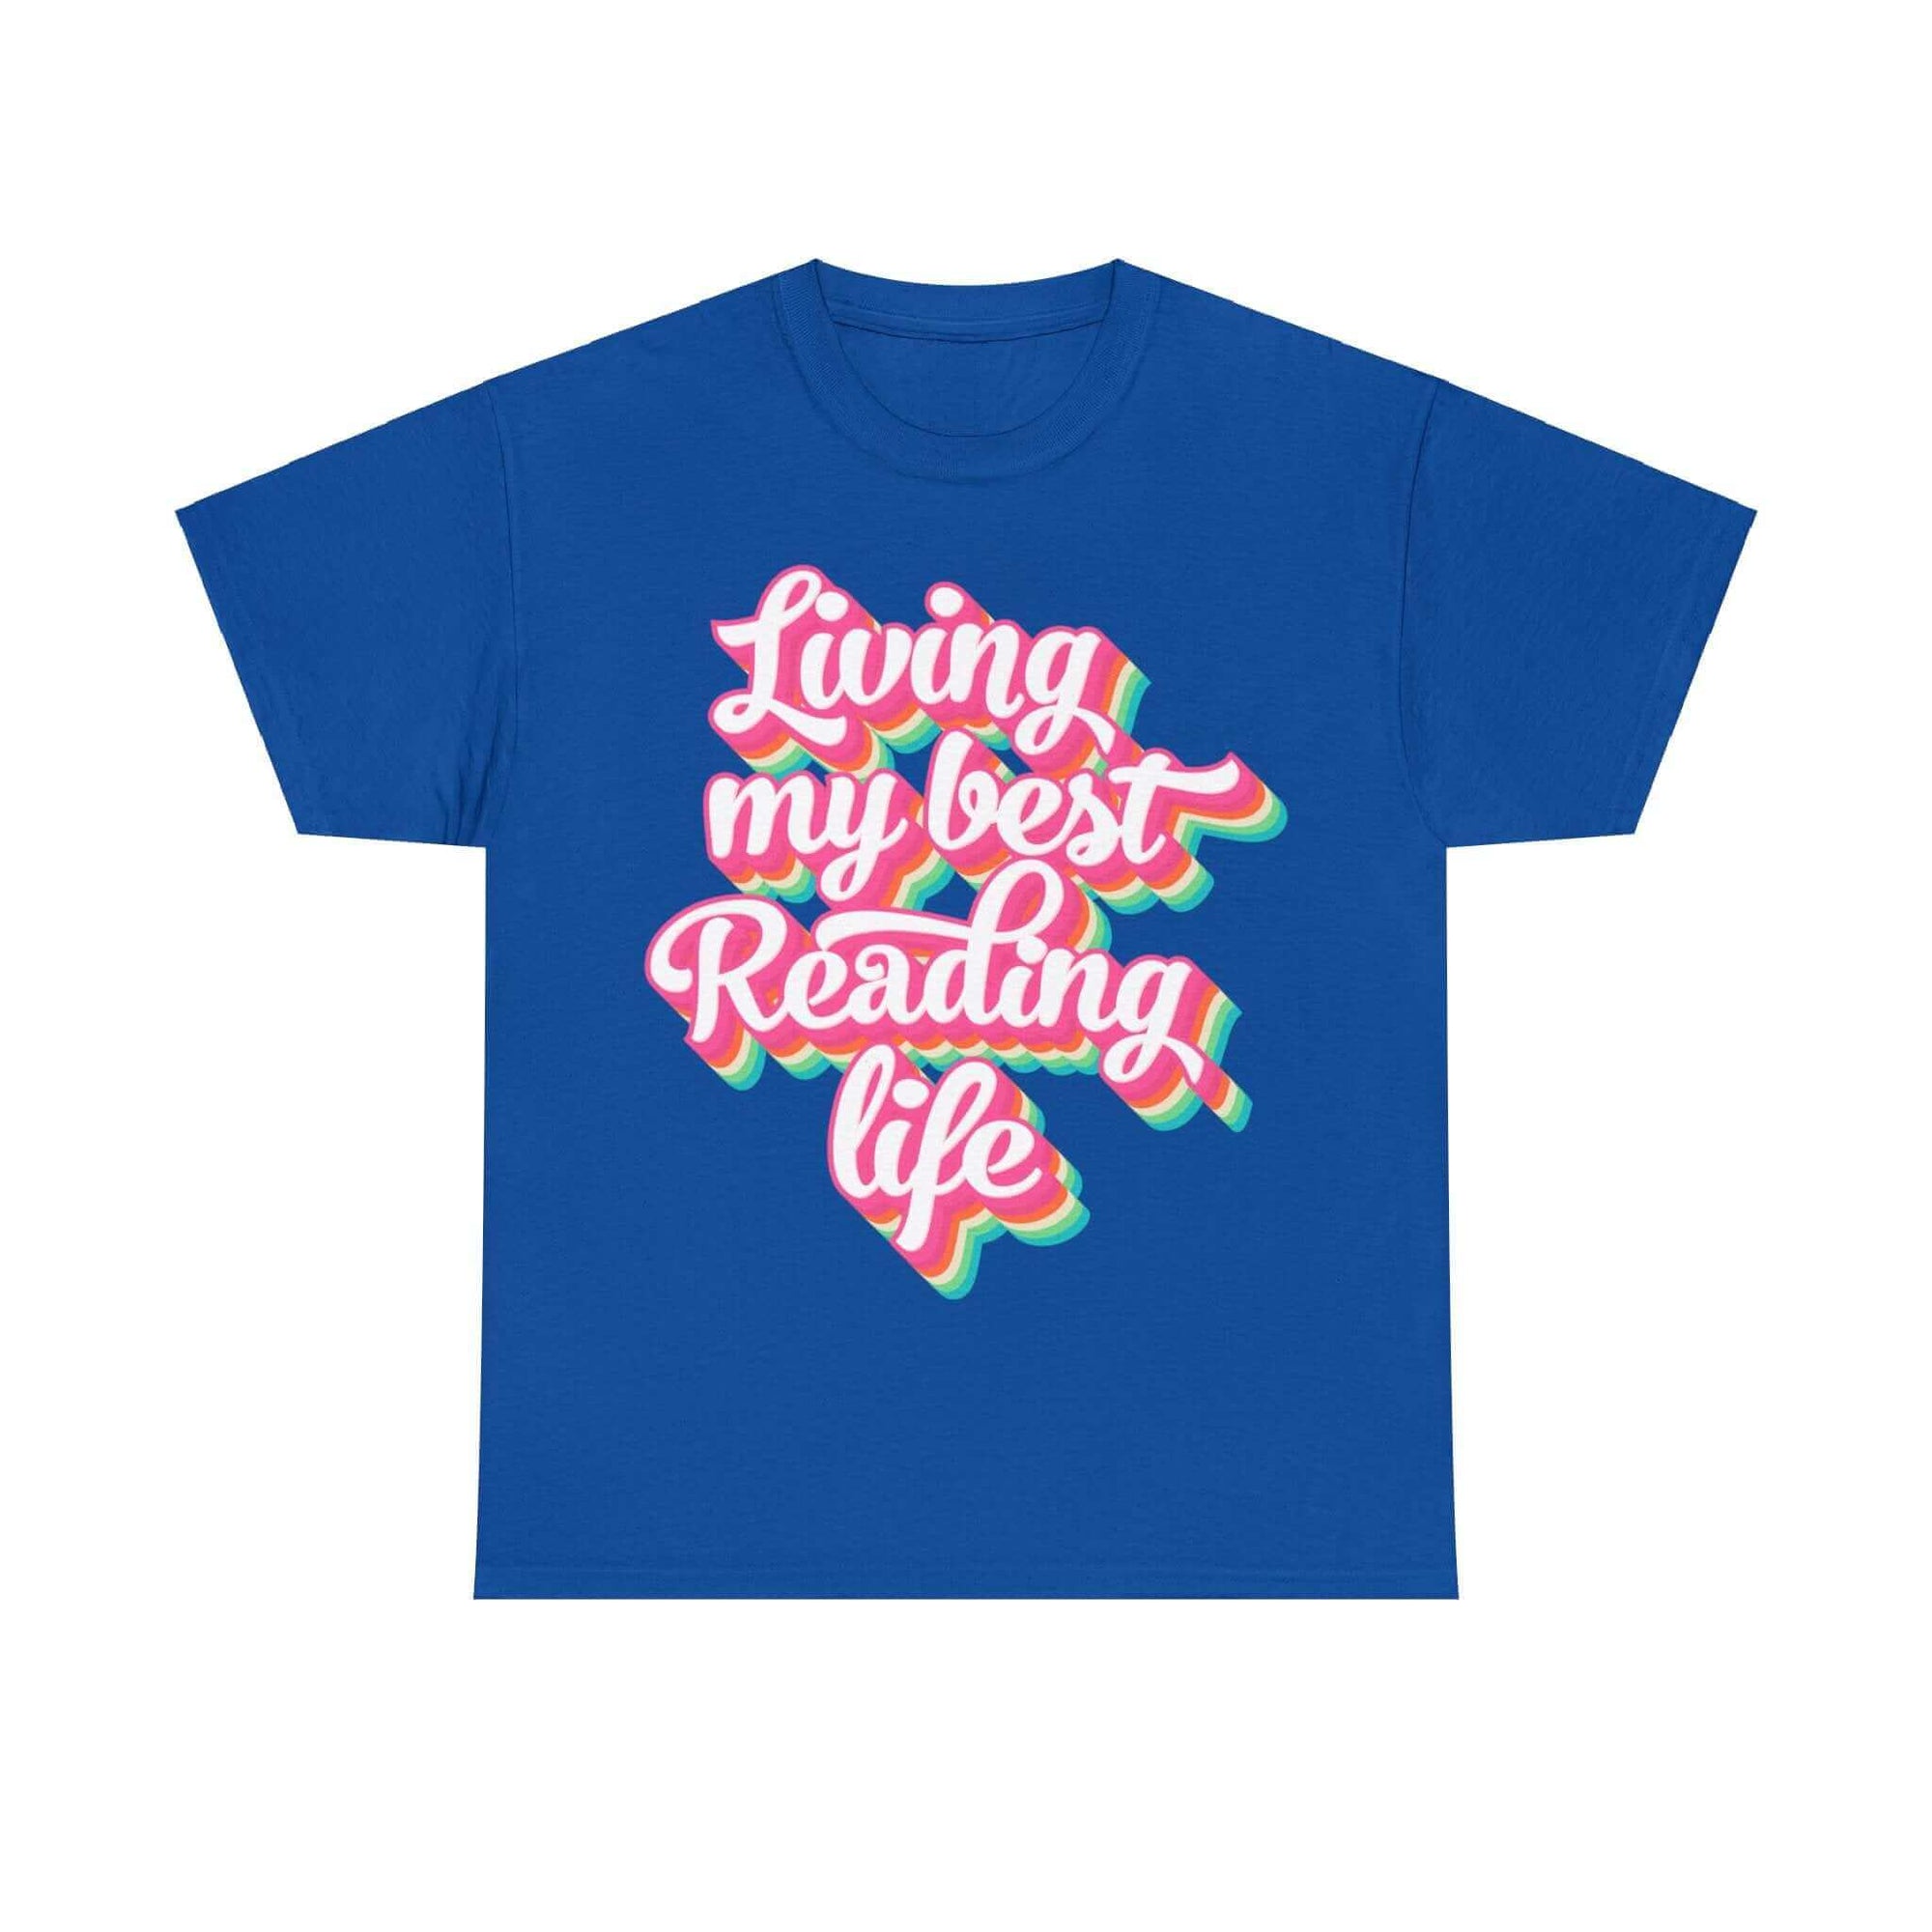 Hello Decodables | Living My Best Reading Life Tee